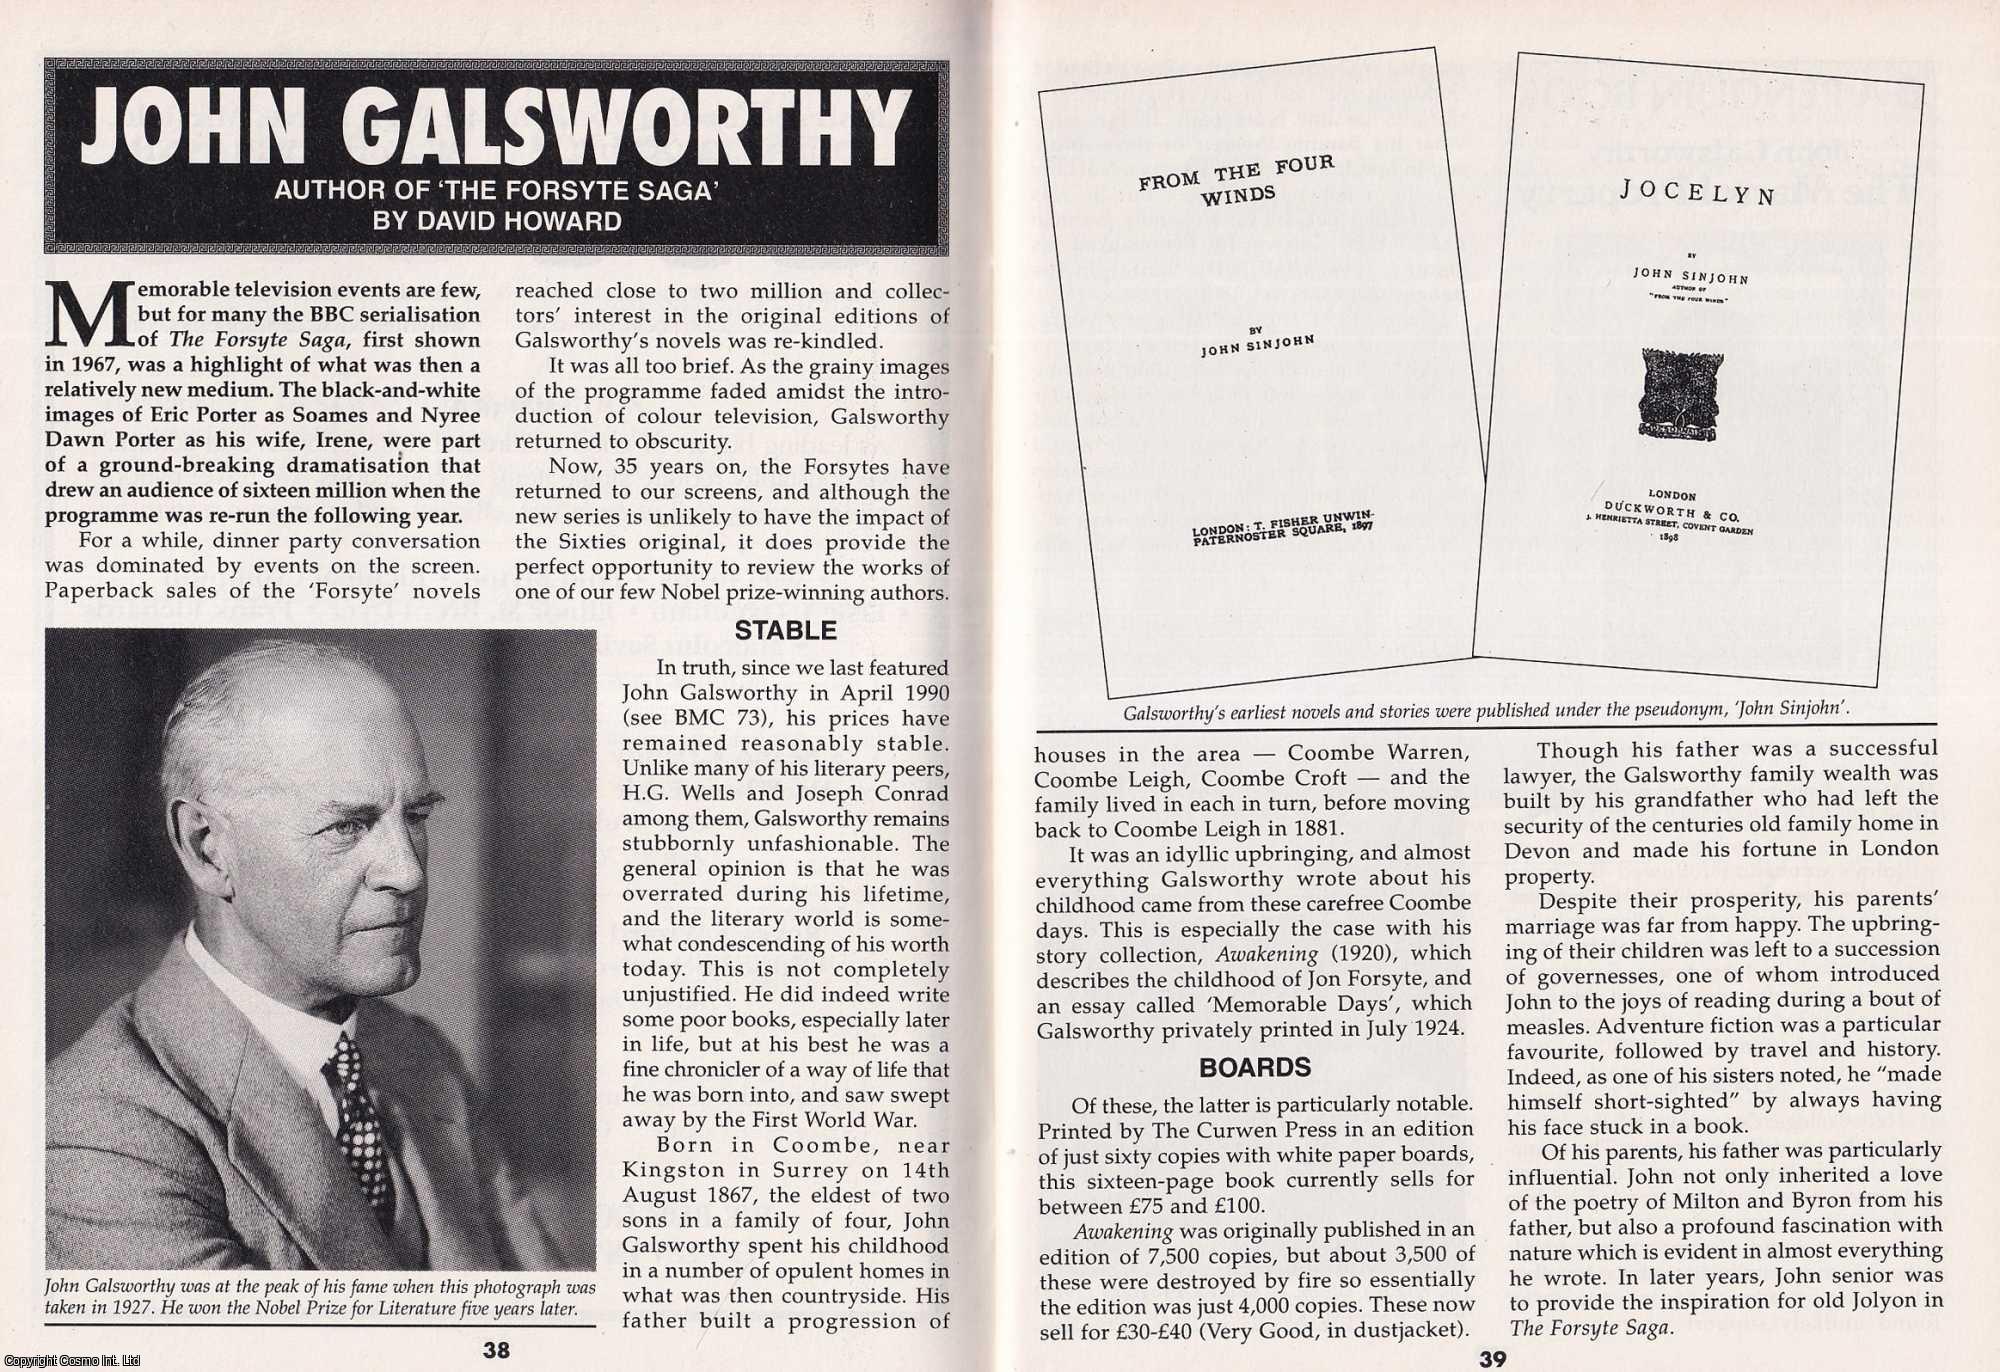 David Howard - The Forsyte Saga, by John Galsworthy. This is an original article separated from an issue of The Book & Magazine Collector publication, 2002.